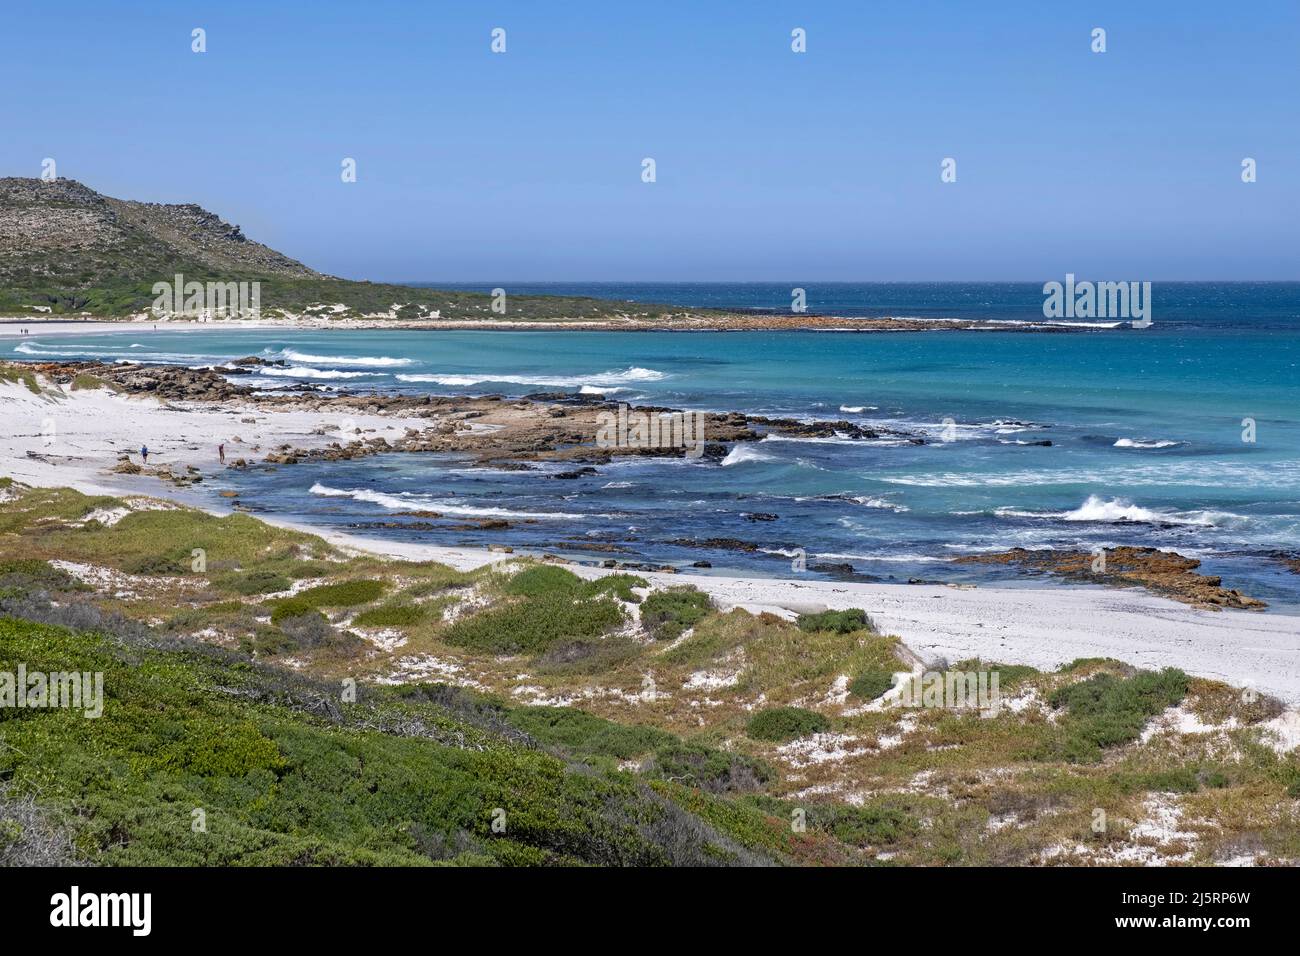 Atlantic Ocean and white sandy beach at the Cape of Good Hope section of Table Mountain National Park, Western Cape Province, South Africa Stock Photo